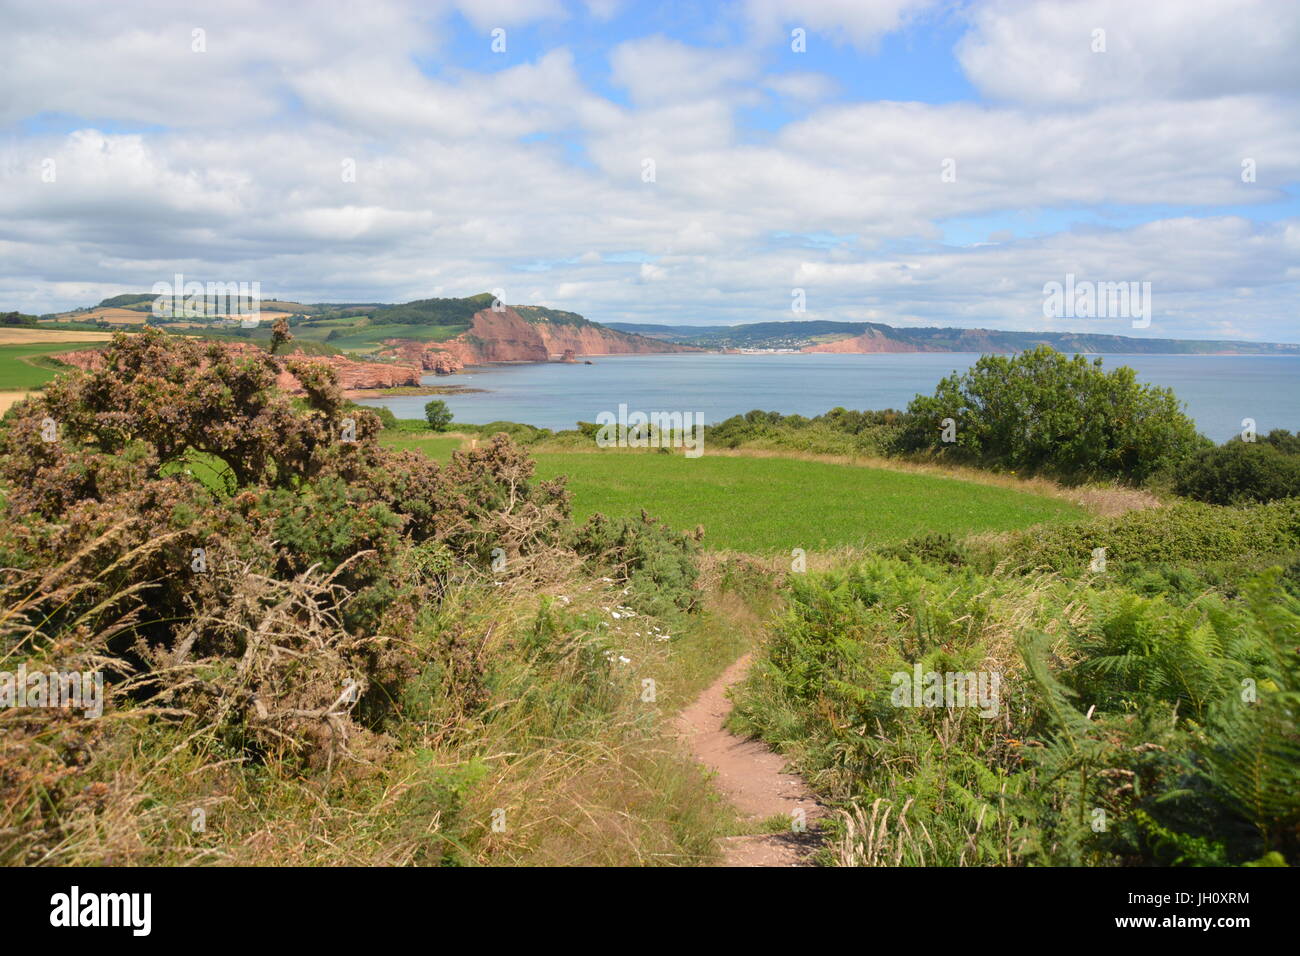 Scenic landscape views of the East Devon coastline from Budleigh Salterton to Sidmouth in East Devon, England Stock Photo